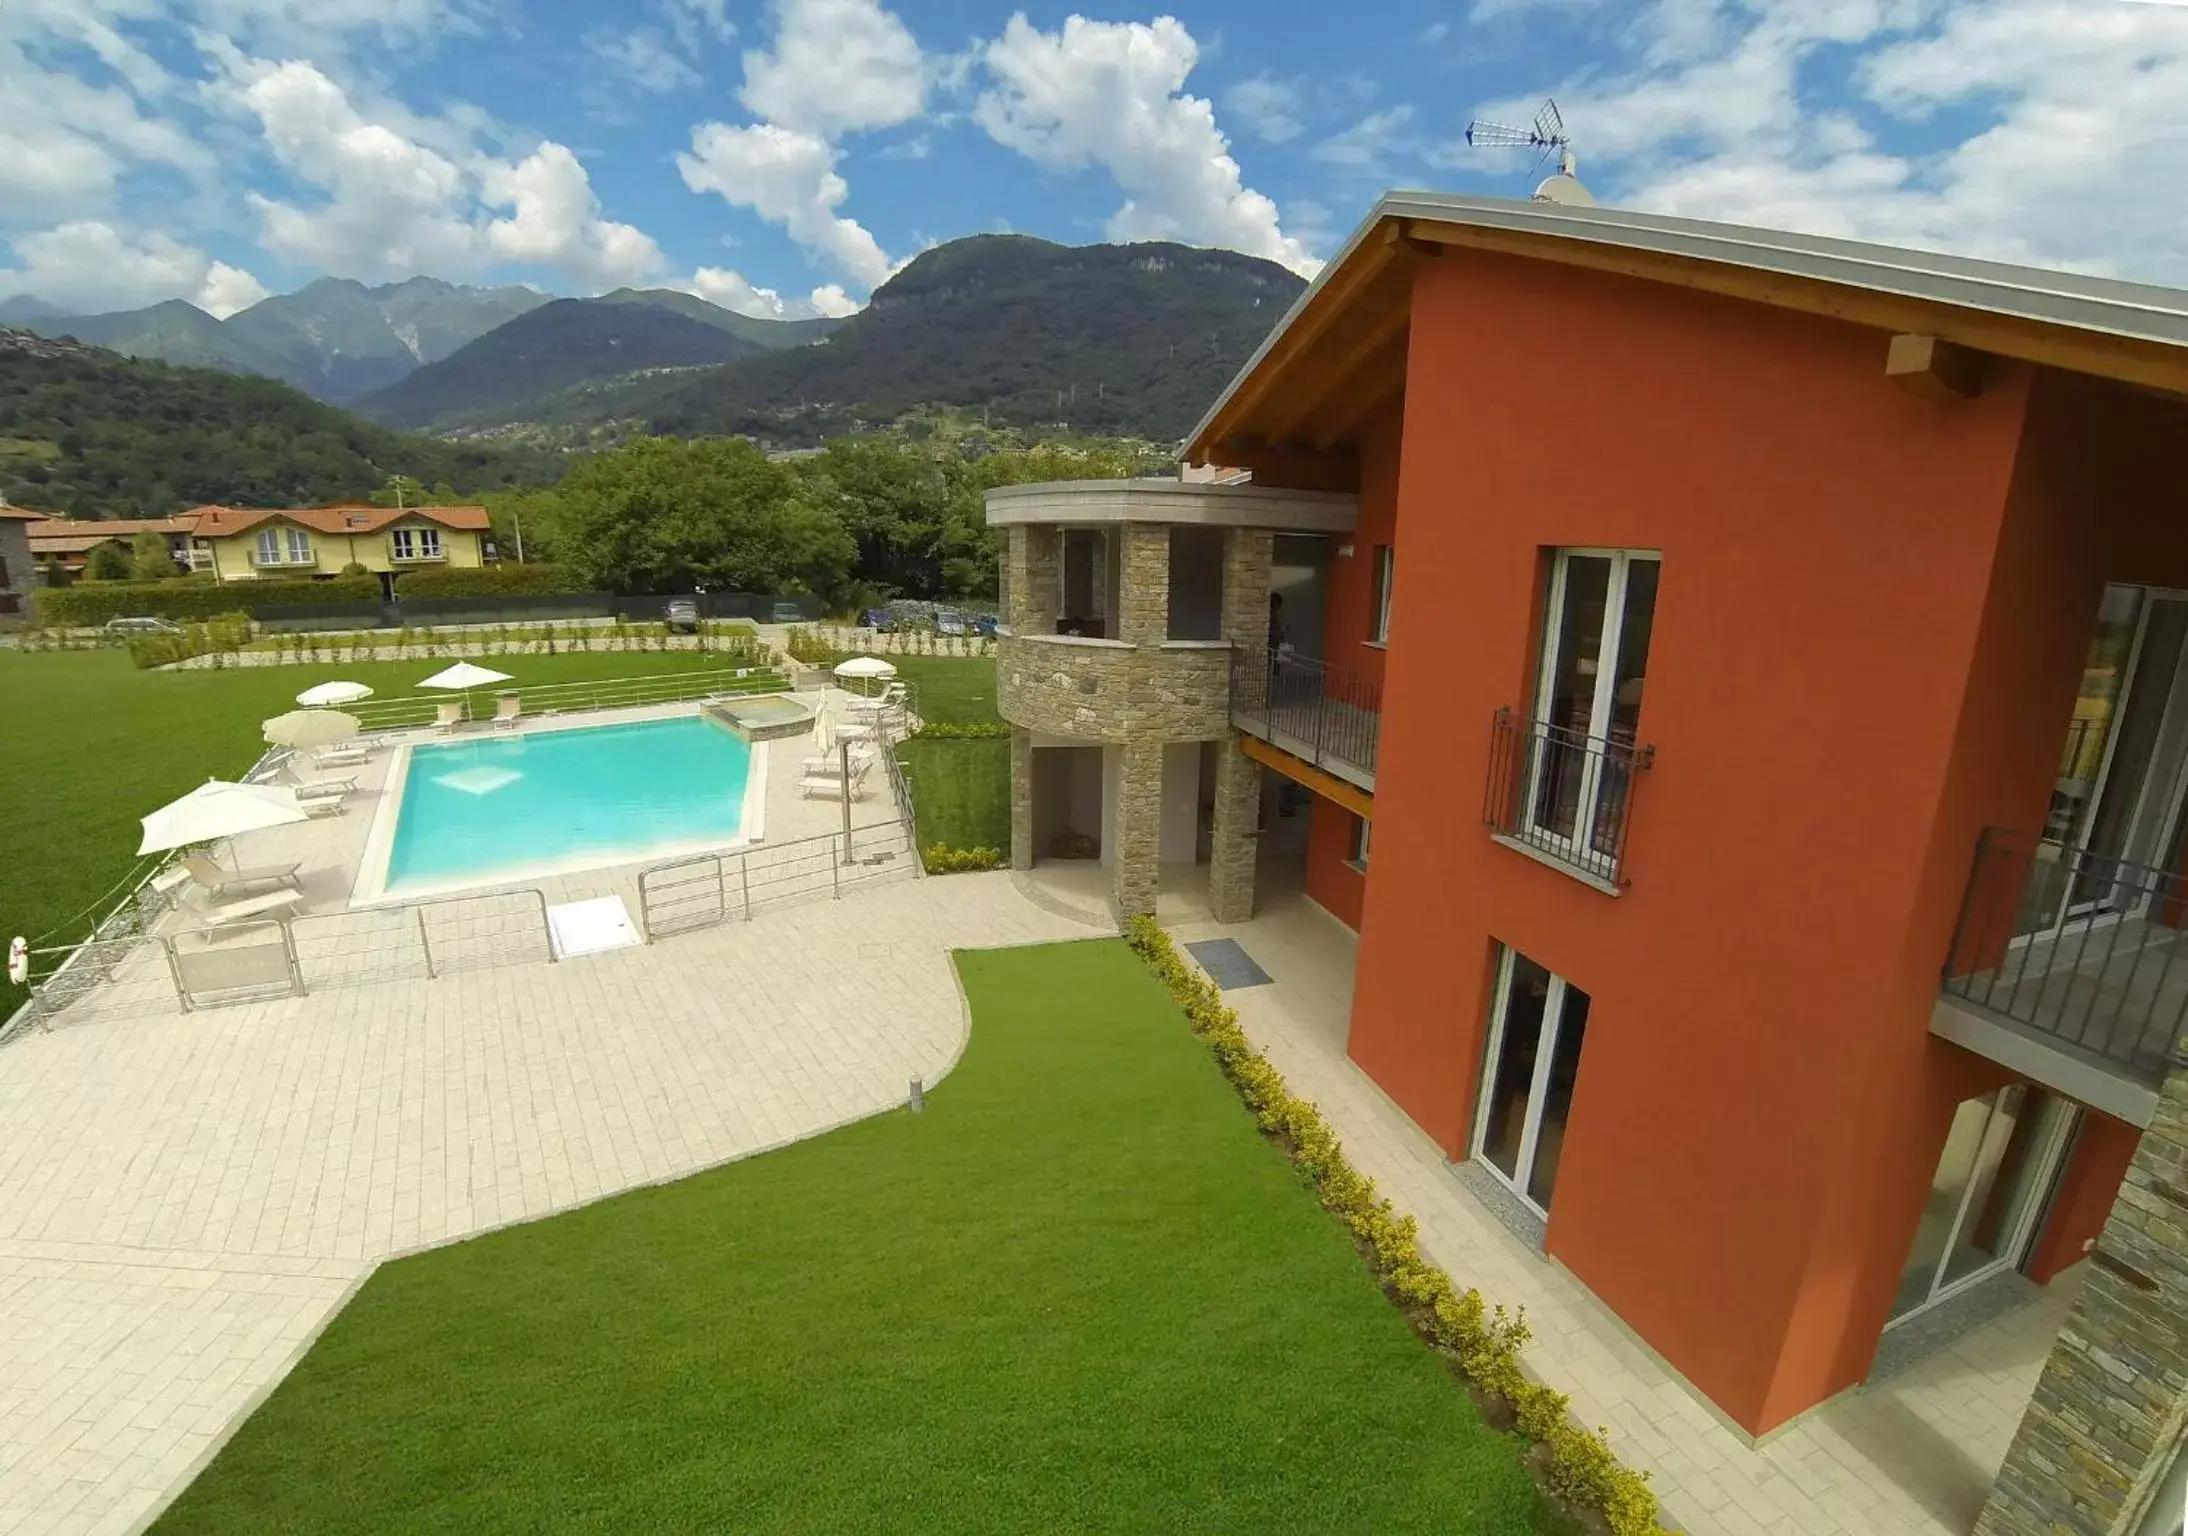 Property building, Pool View in Residence Villa Paradiso